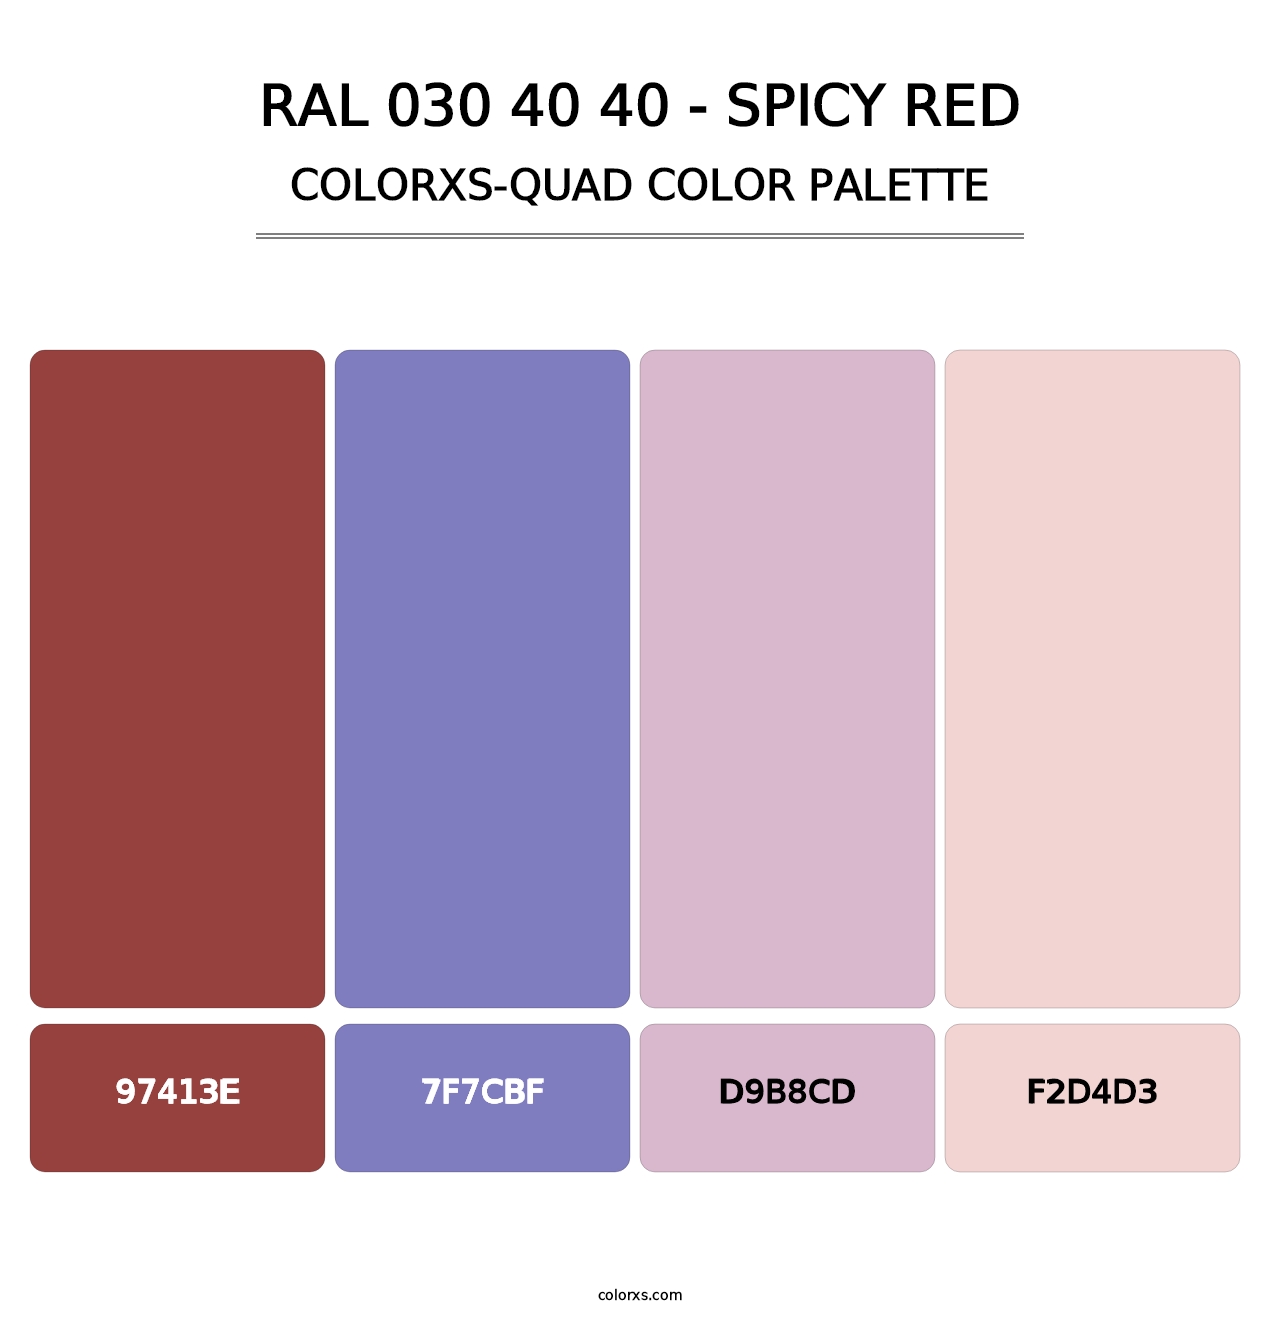 RAL 030 40 40 - Spicy Red - Colorxs Quad Palette